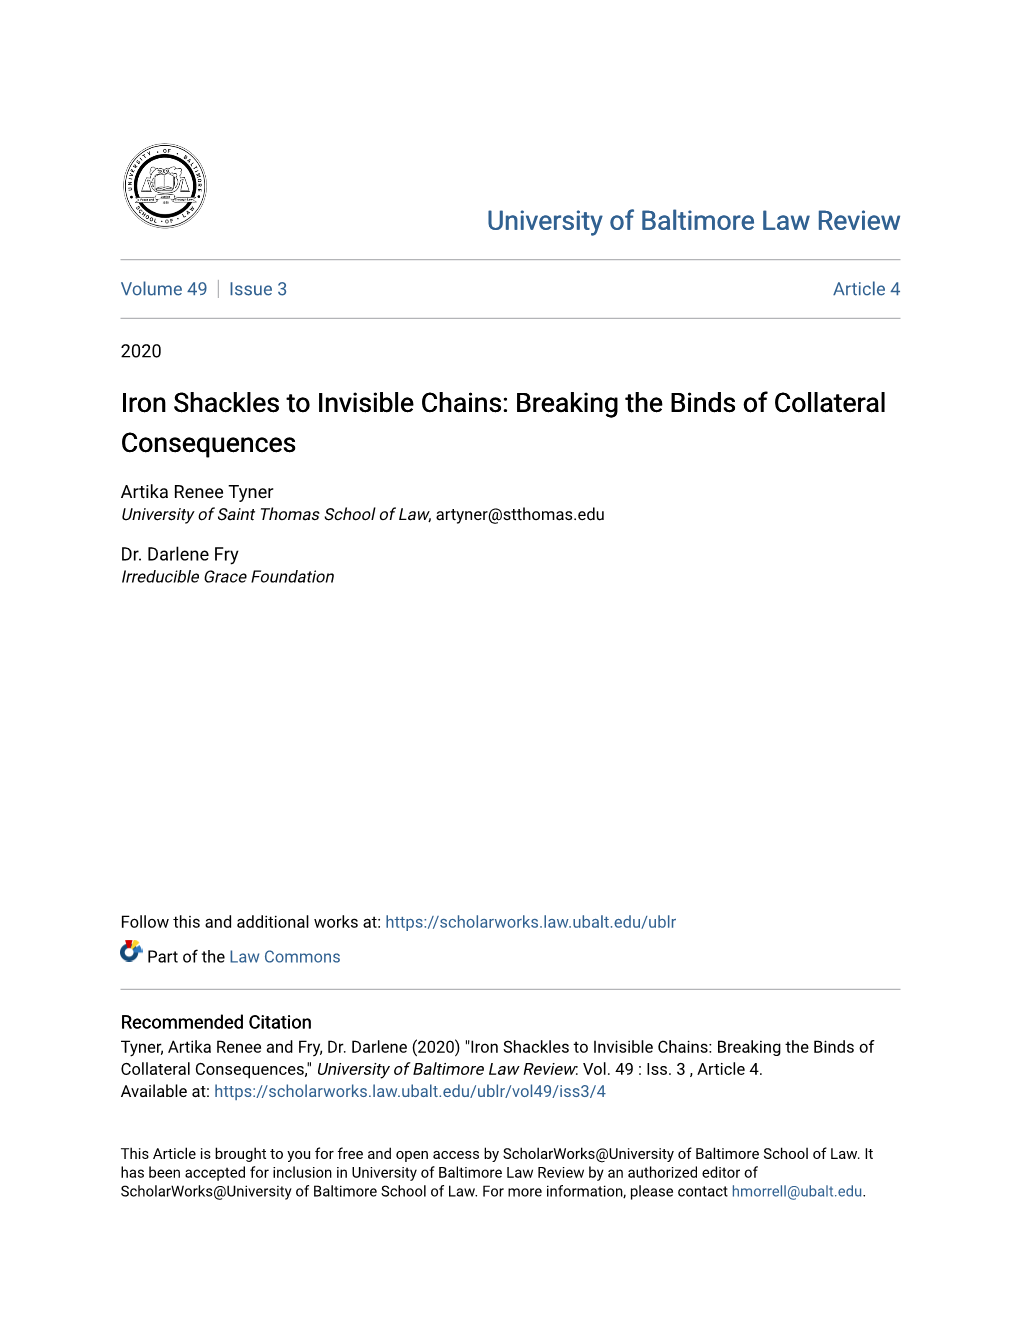 Iron Shackles to Invisible Chains: Breaking the Binds of Collateral Consequences